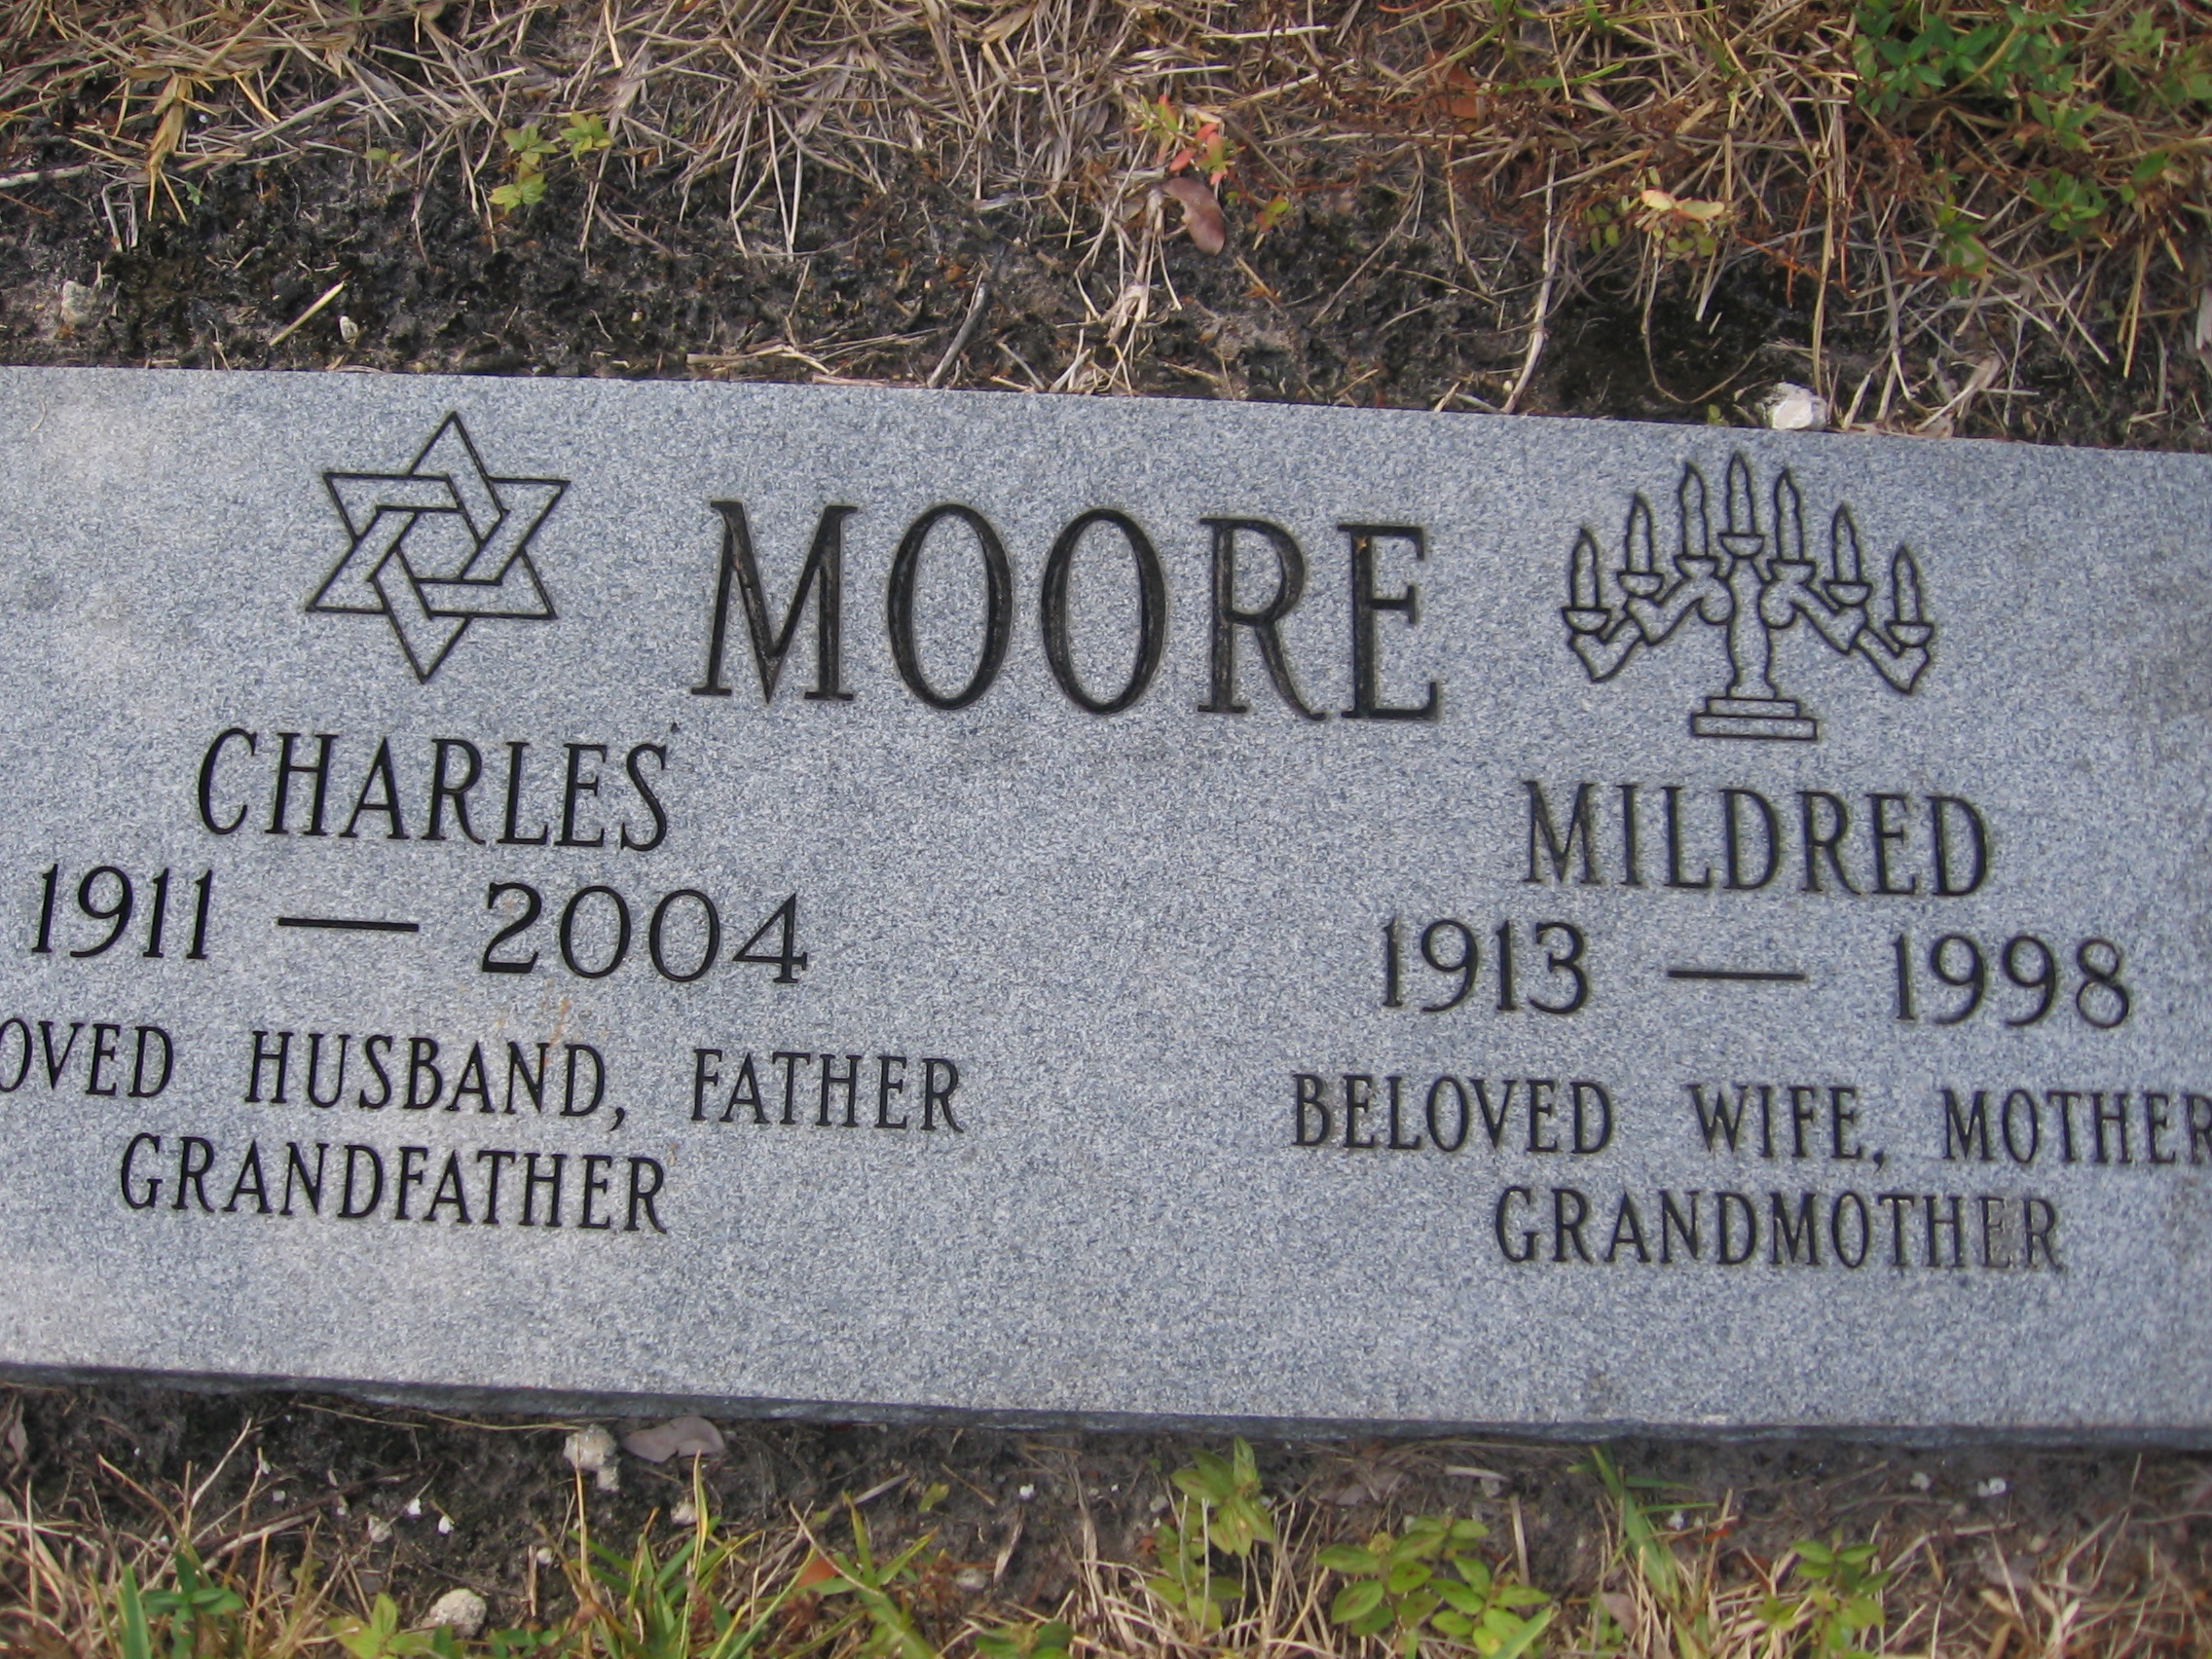 Mildred Moore